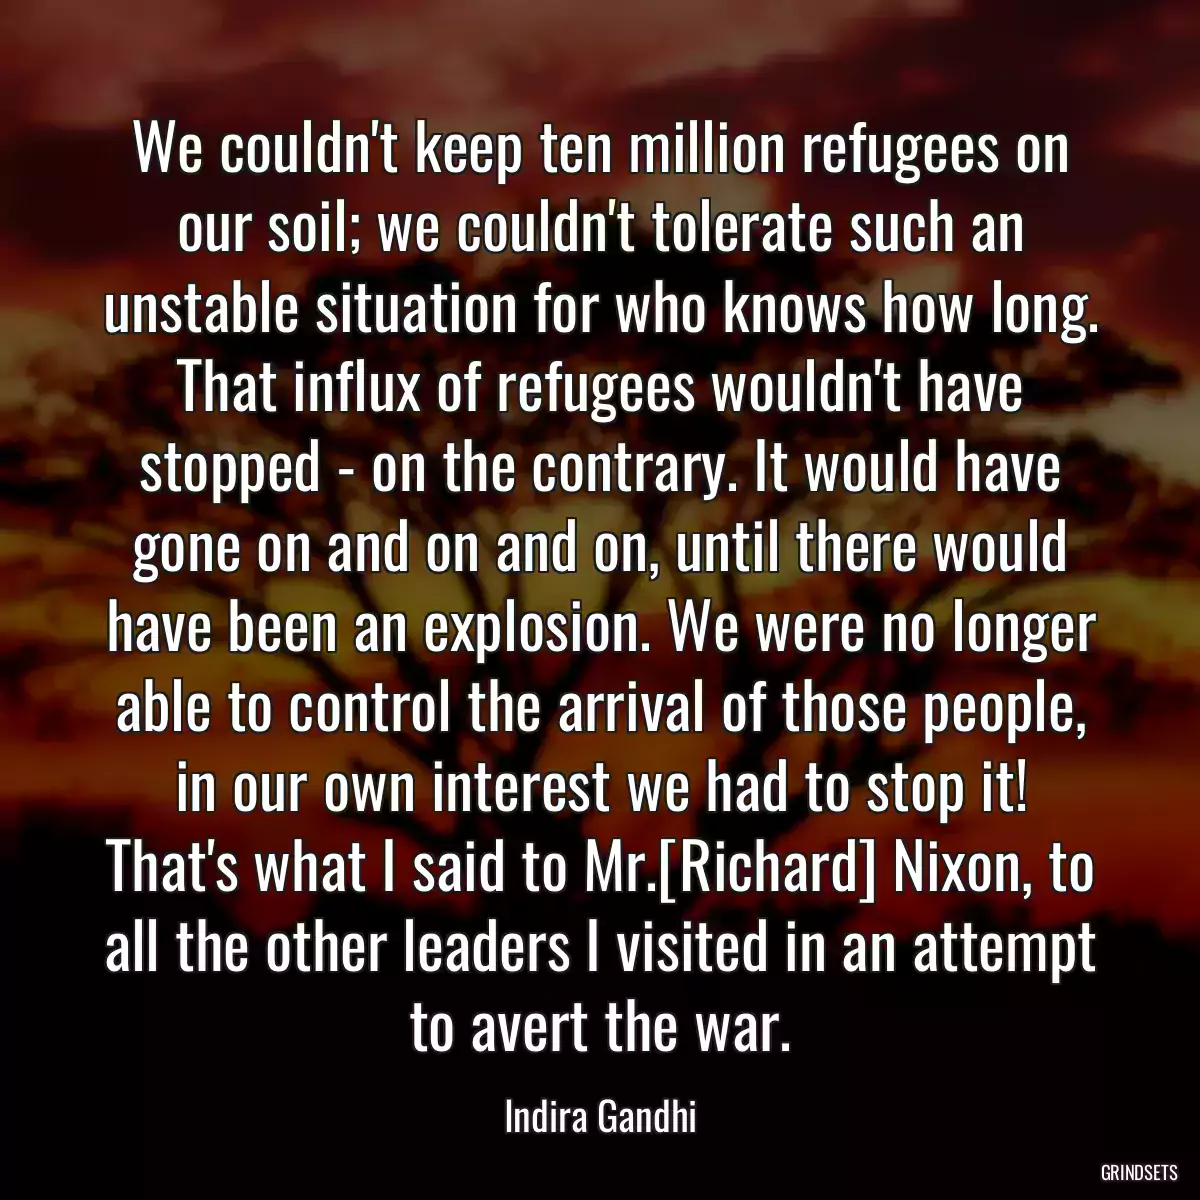 We couldn\'t keep ten million refugees on our soil; we couldn\'t tolerate such an unstable situation for who knows how long. That influx of refugees wouldn\'t have stopped - on the contrary. It would have gone on and on and on, until there would have been an explosion. We were no longer able to control the arrival of those people, in our own interest we had to stop it! That\'s what I said to Mr.[Richard] Nixon, to all the other leaders I visited in an attempt to avert the war.